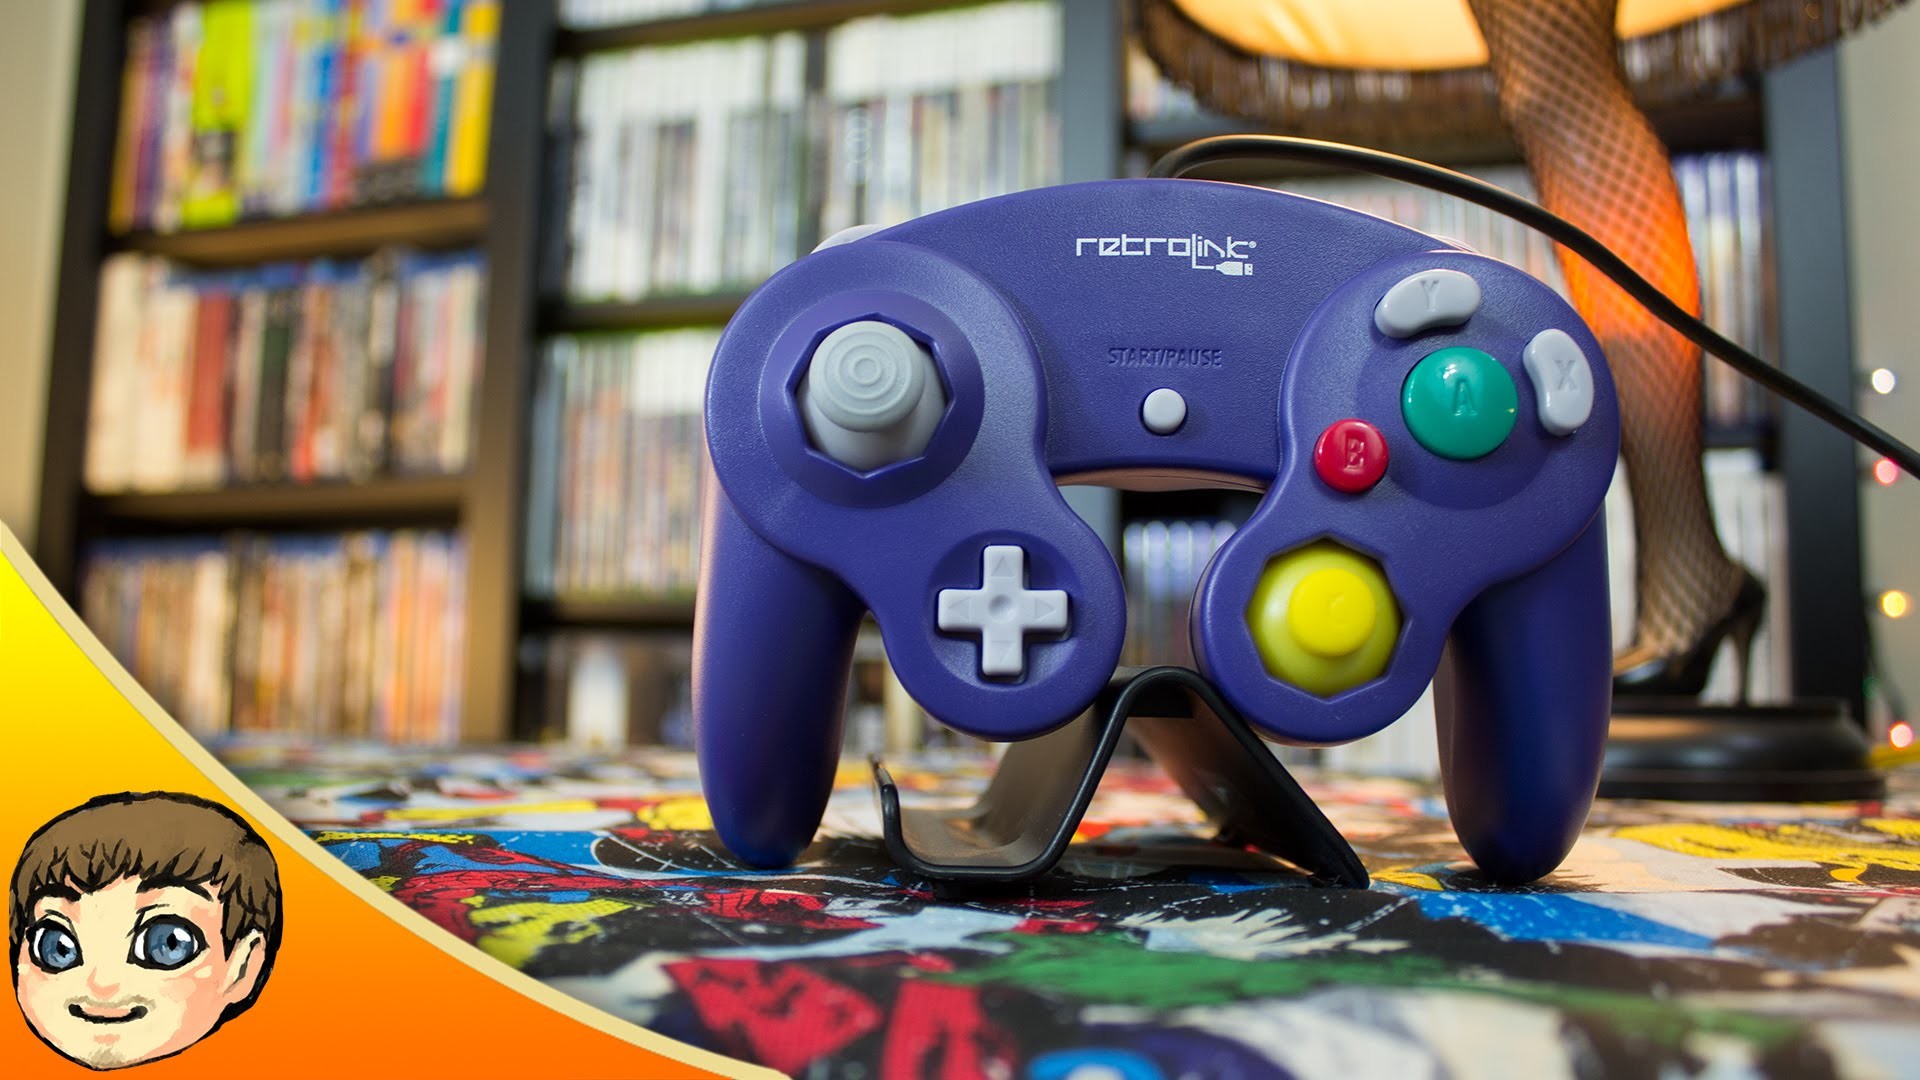 1920x1080 GameCube Controller for PC! | RetroLink GameCube USB Controller Review -  YouTube